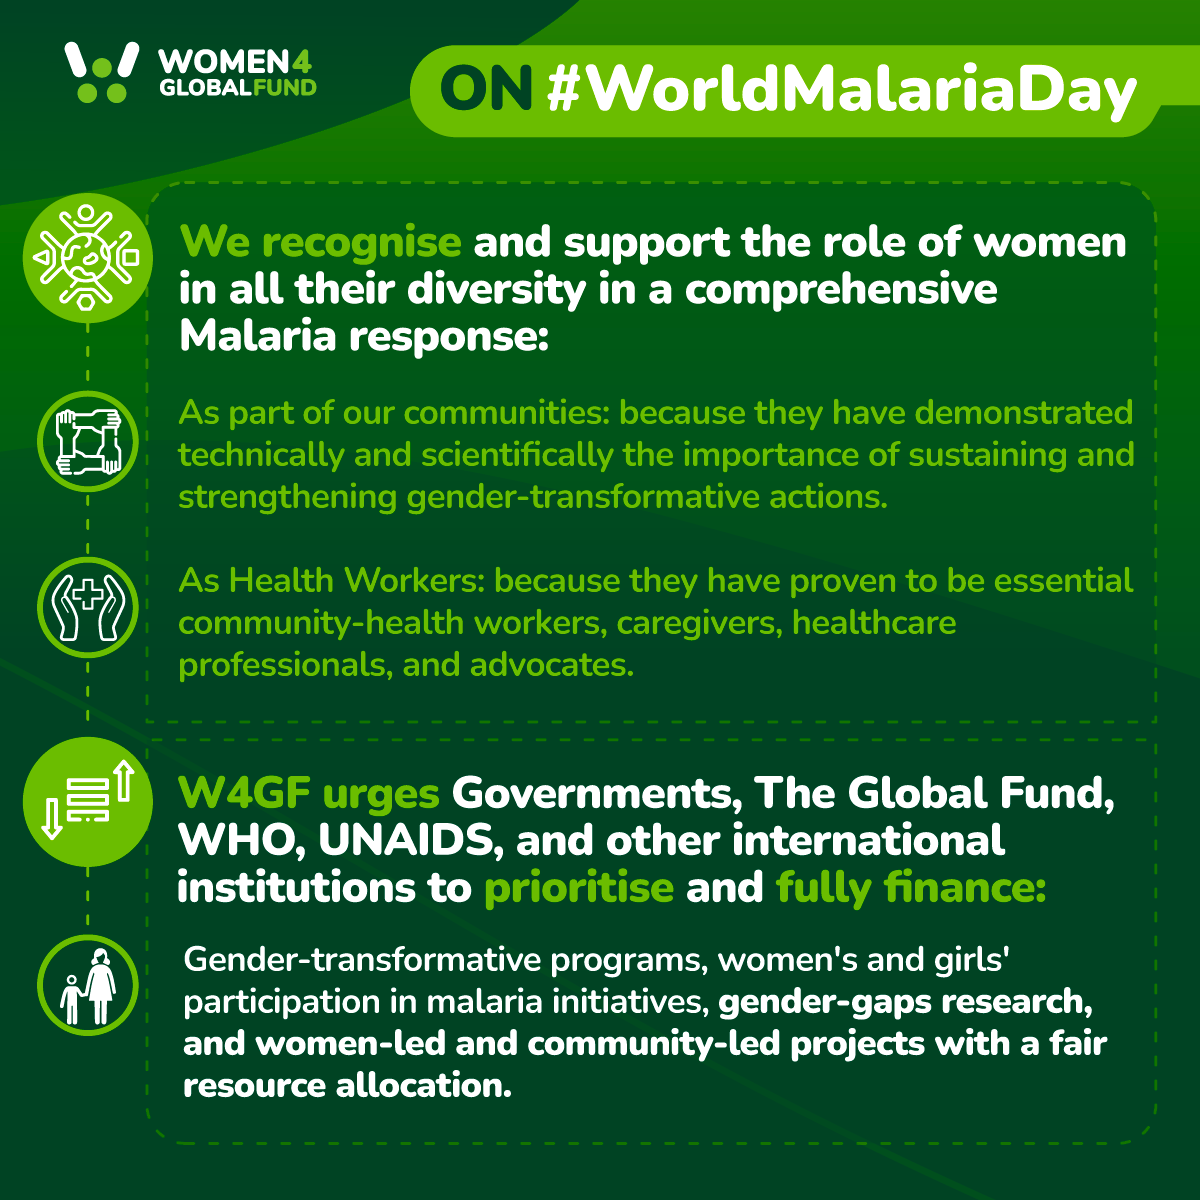 On this #WorldMalariaDay we stand with women in their diversity, recognise their key role as essential community health workers, caregivers and advocates and call international health institutions to #FUNDHERHEALTH